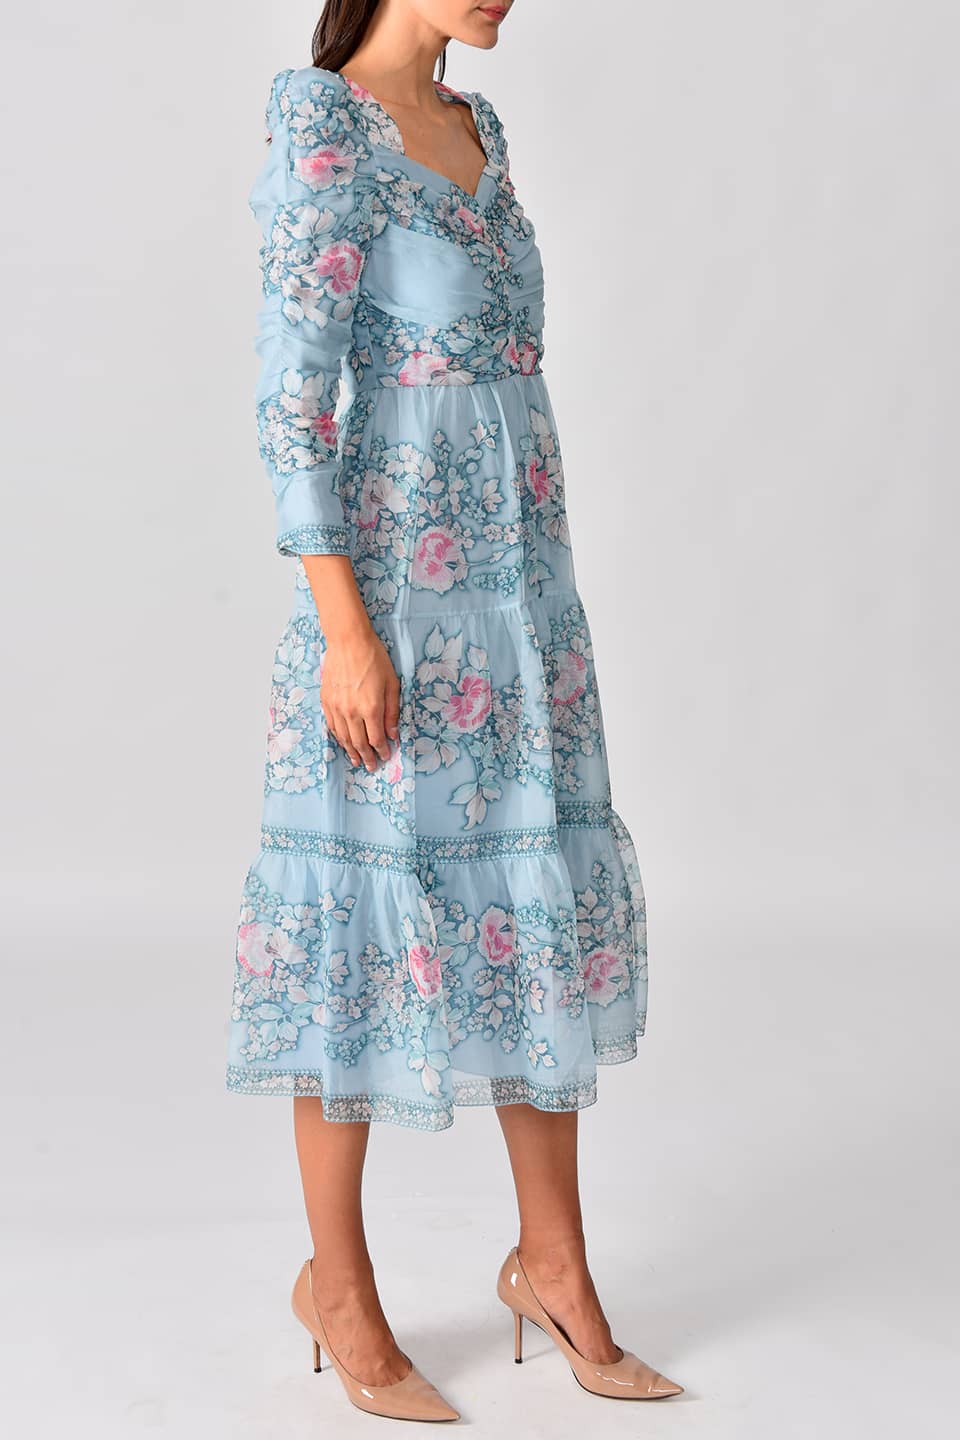 Thumbnail for Product gallery 3, Model wearing floral print silk chiffon tiered long dress in a pale blue color from stylist Vilshenho, posing on right side